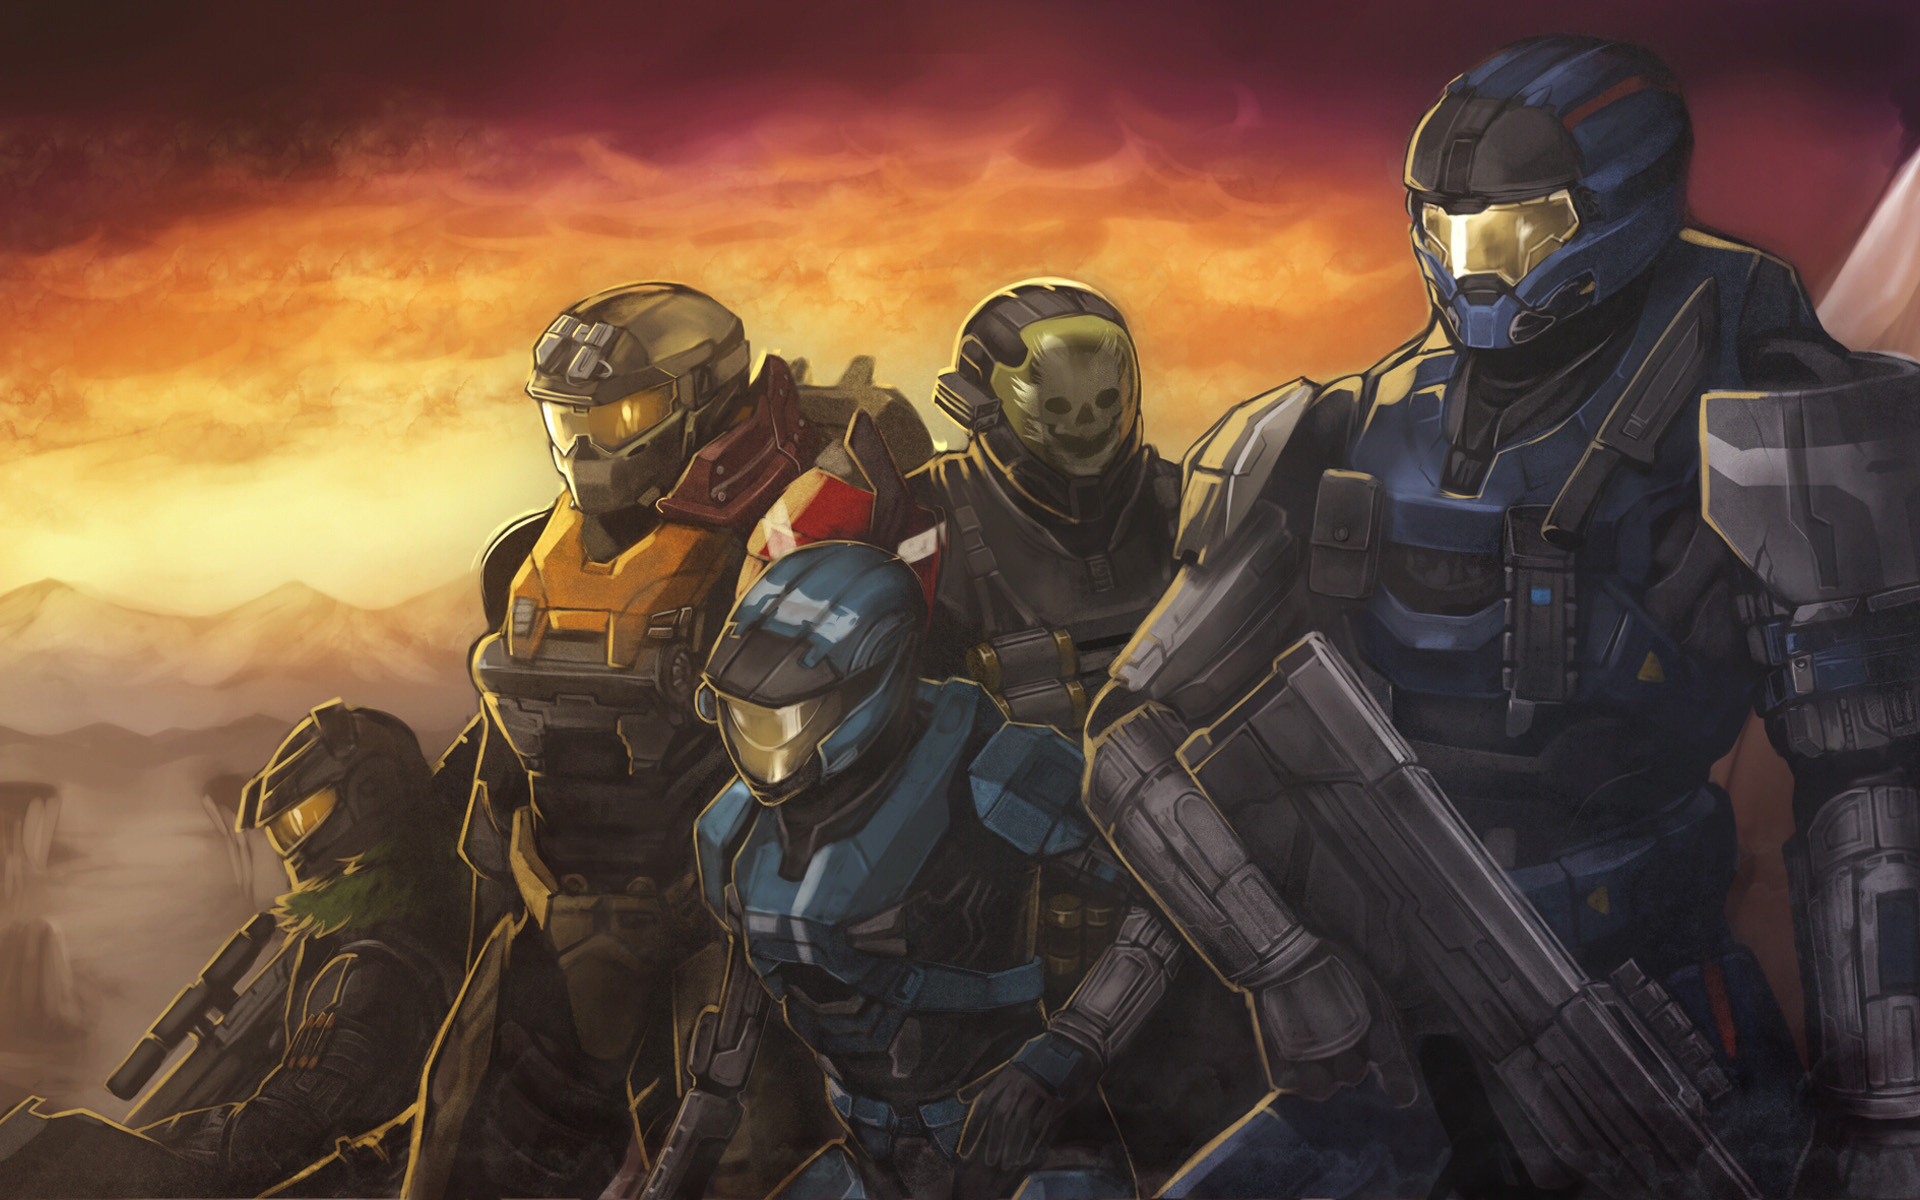 Halo game HD wallpapers #20 - 1920x1200